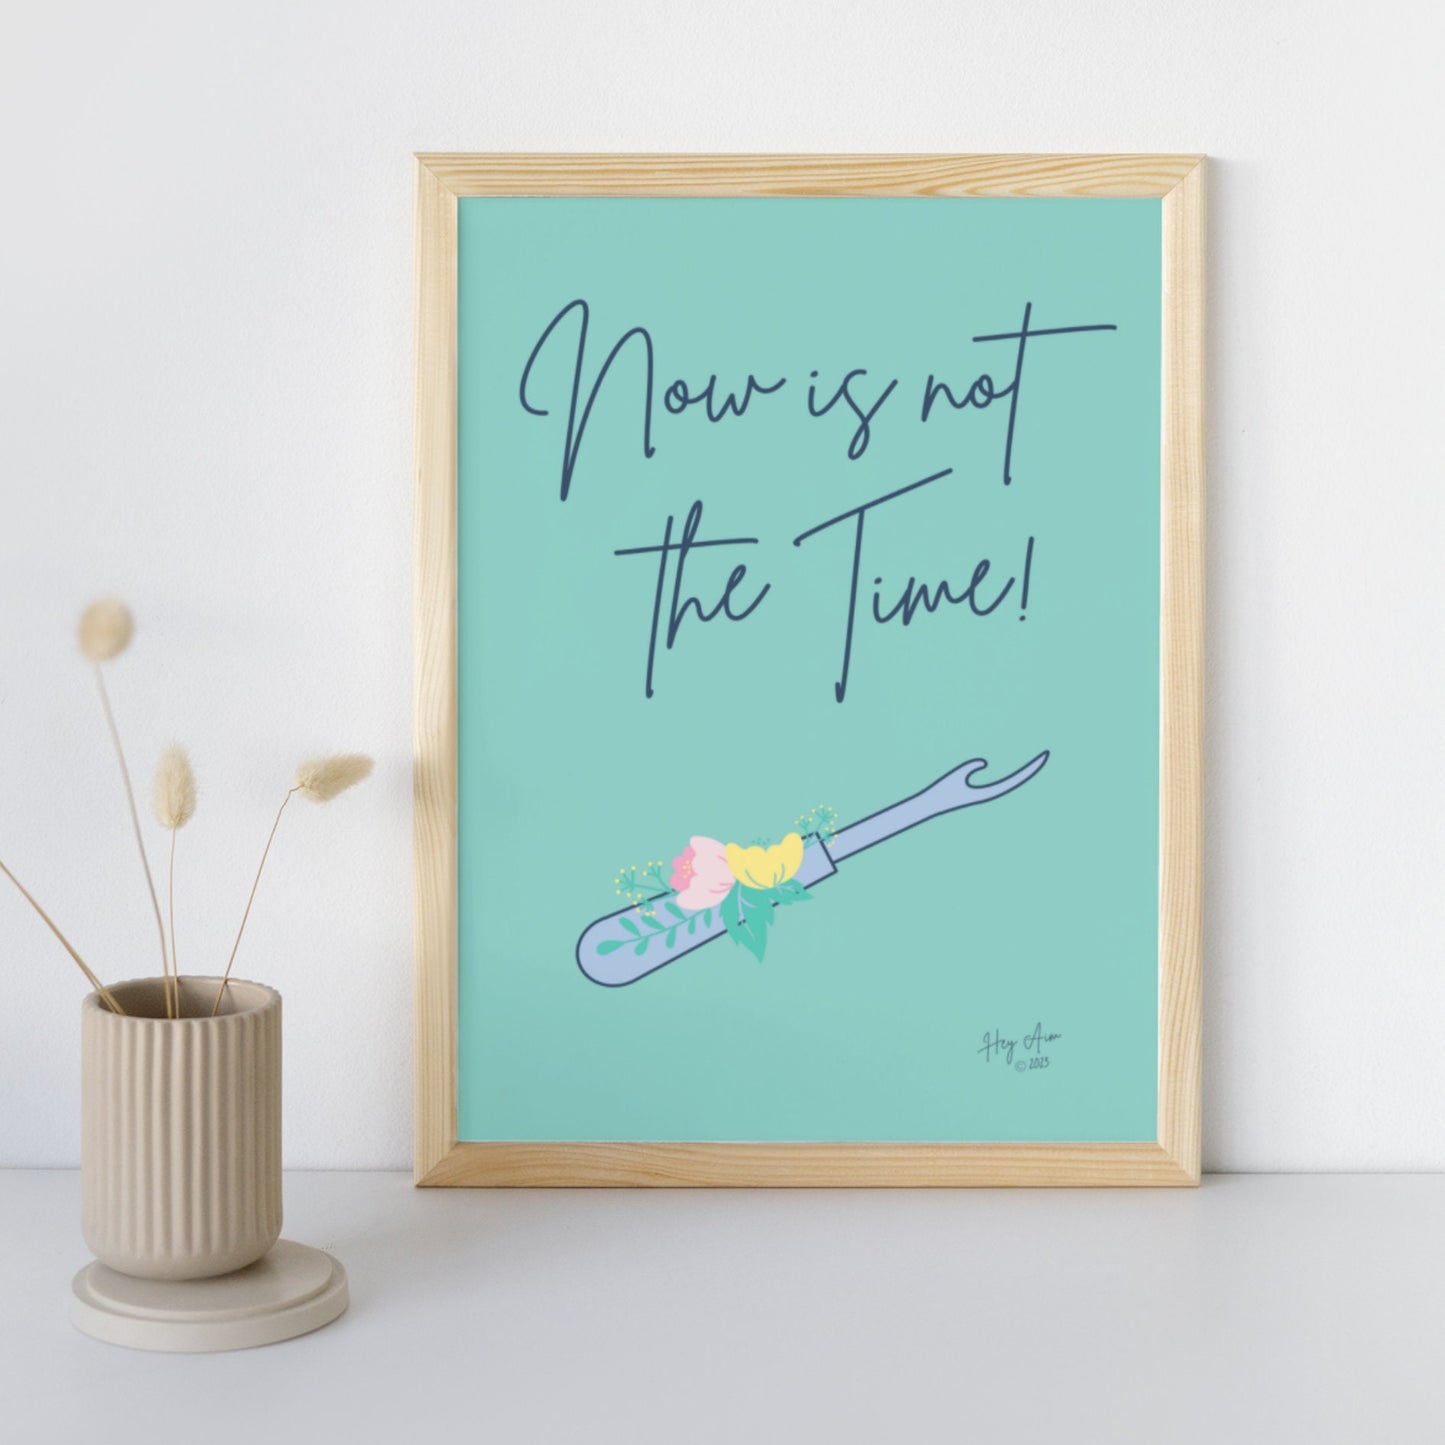 Now Is Not The Time | Digital Wall Art | Download Only | A3, A4, A5, A6 Sizes